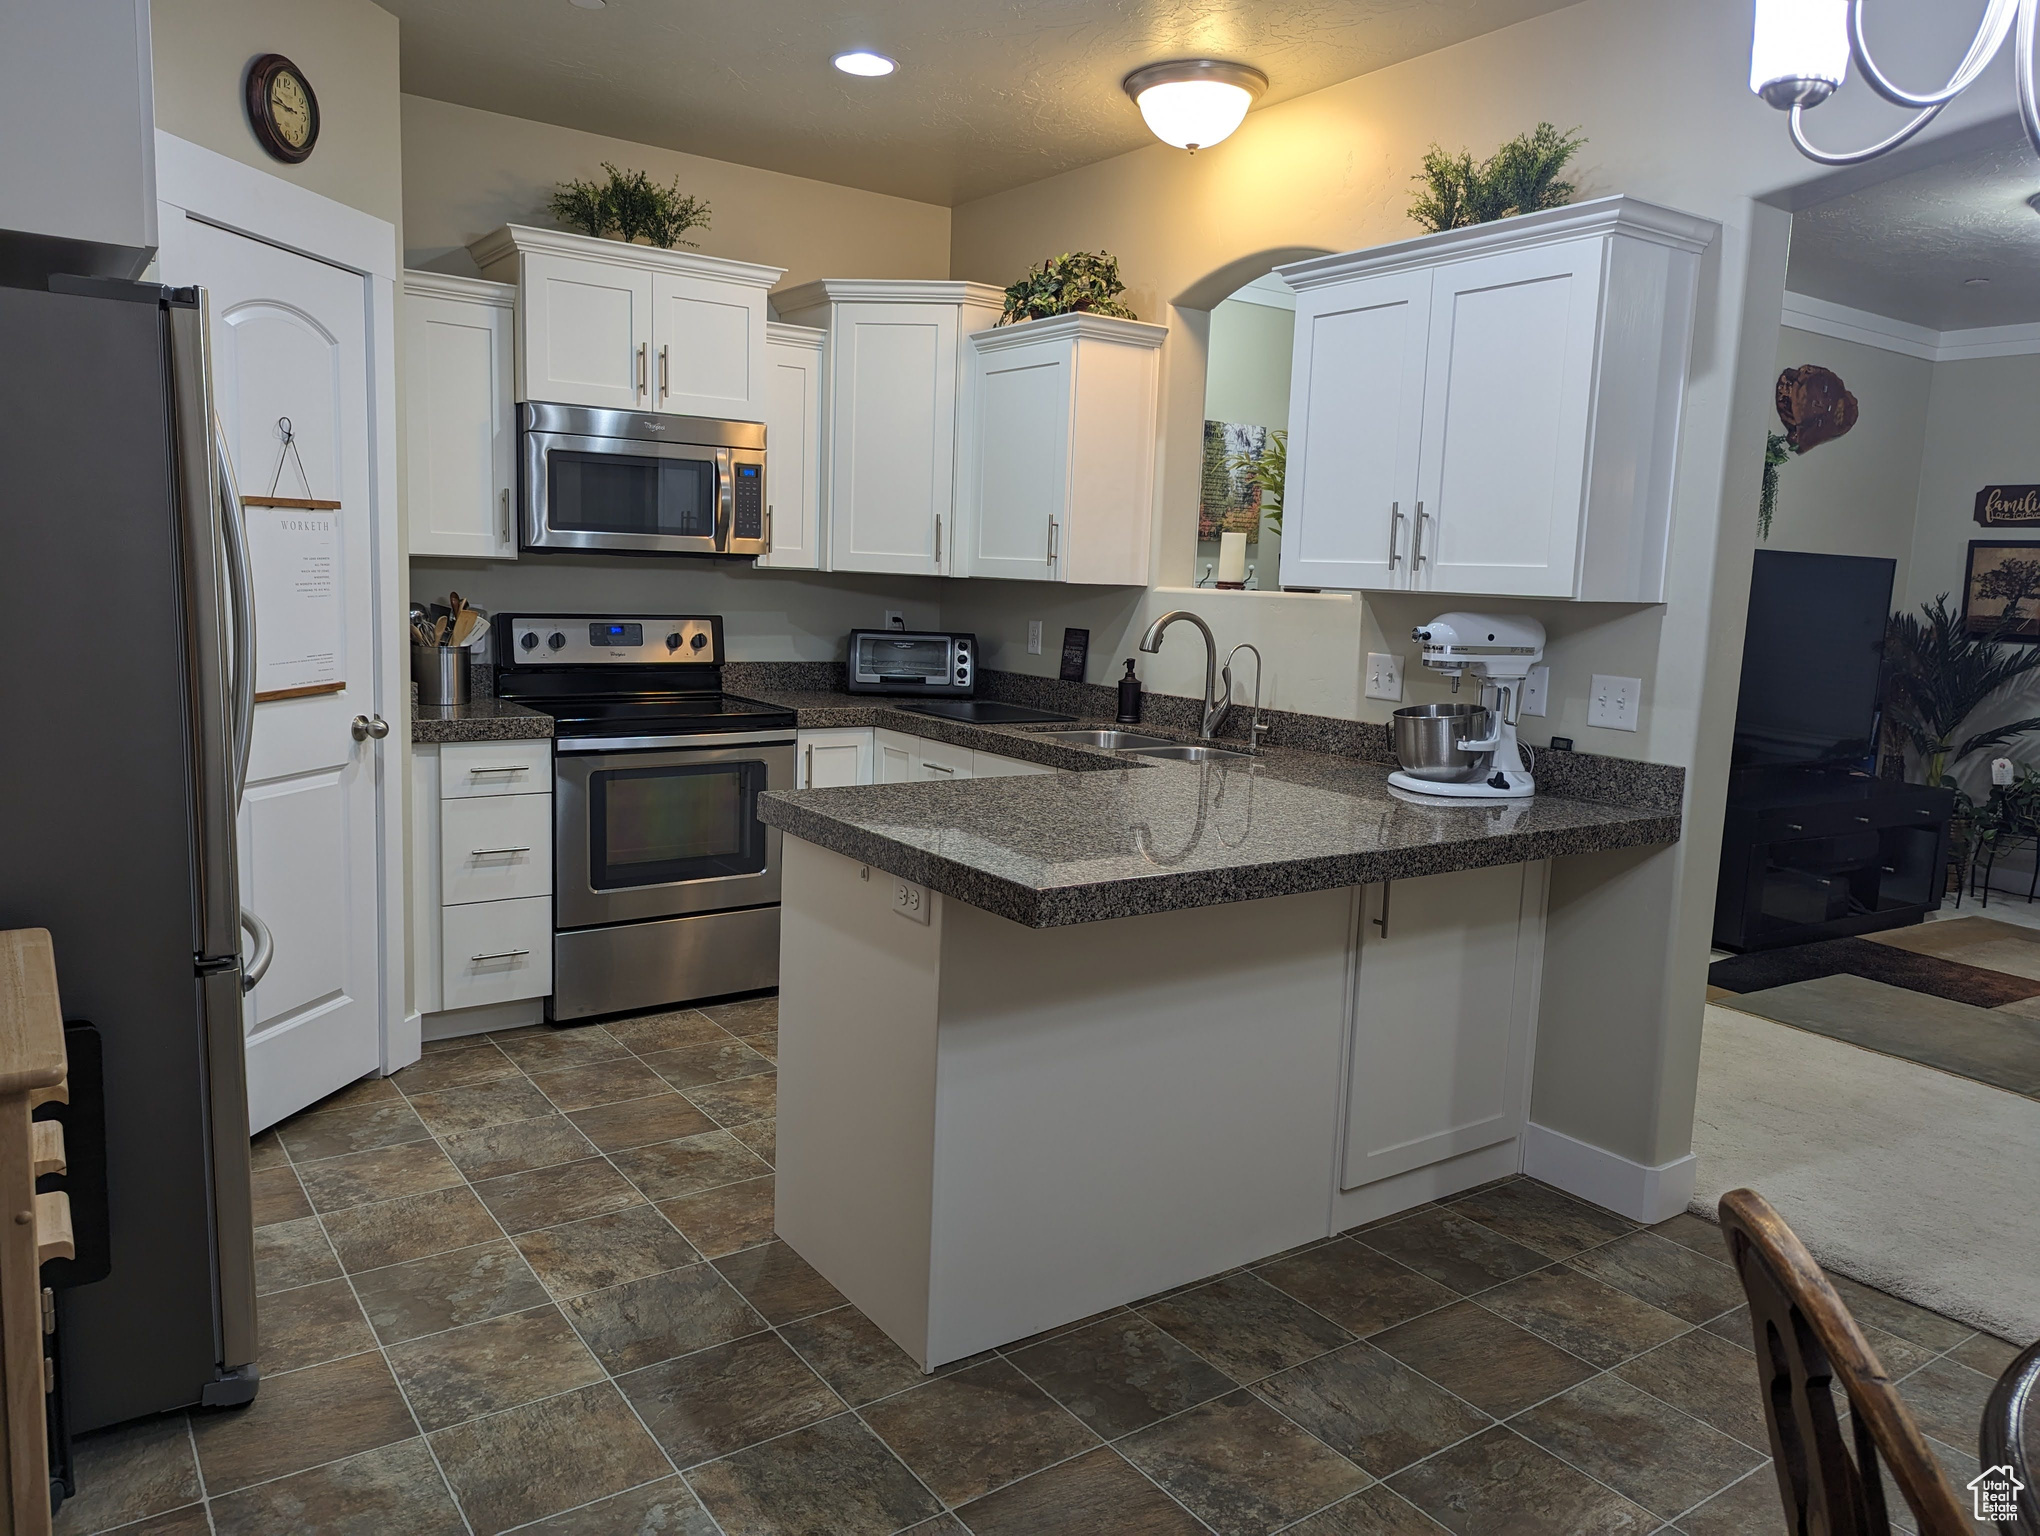 Kitchen featuring crown molding, kitchen peninsula, appliances with stainless steel finishes, sink, and dark tile flooring